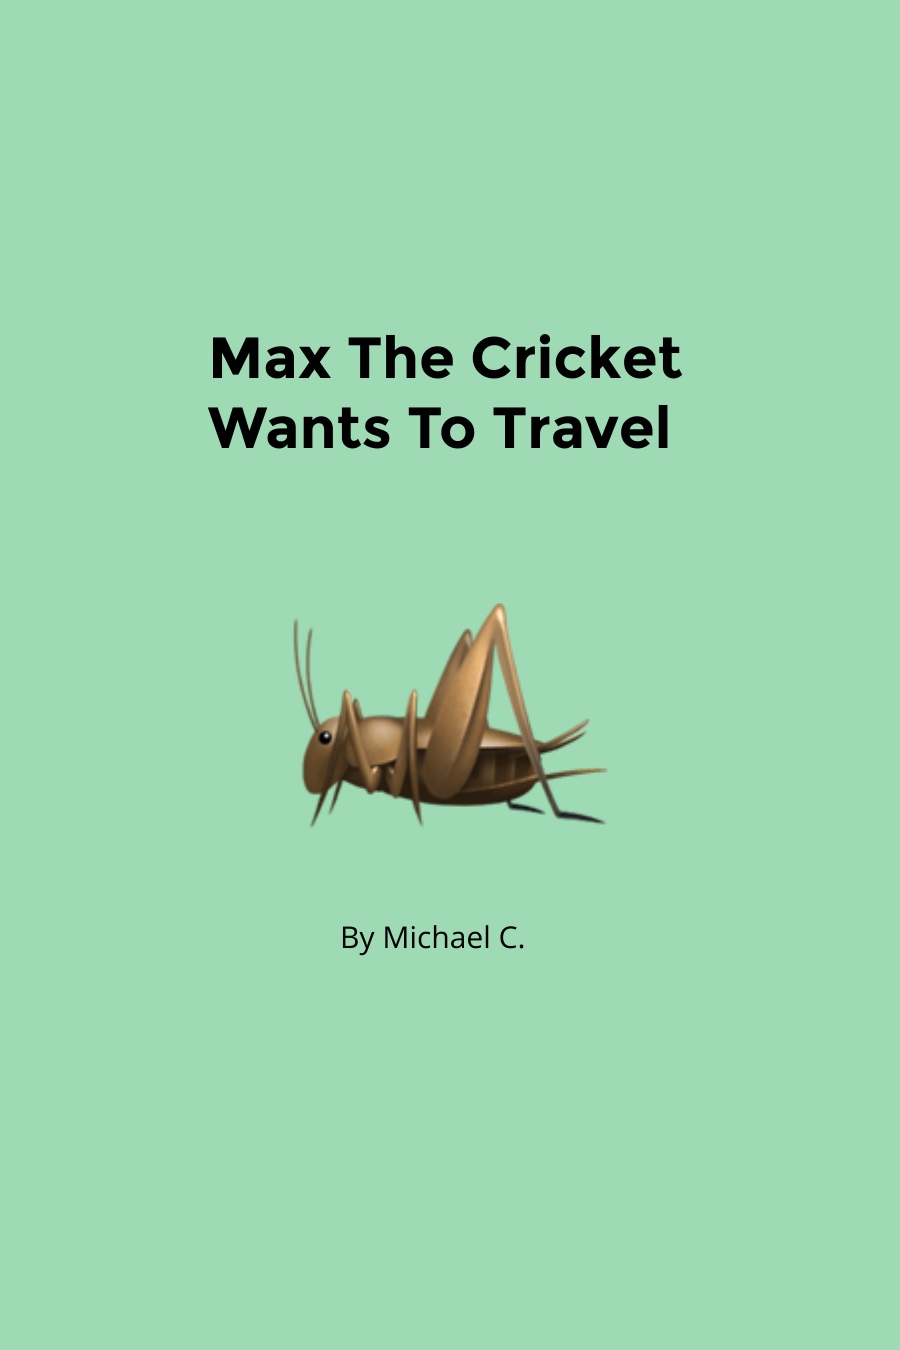 Max The Cricket Wants To Travel by Michael C